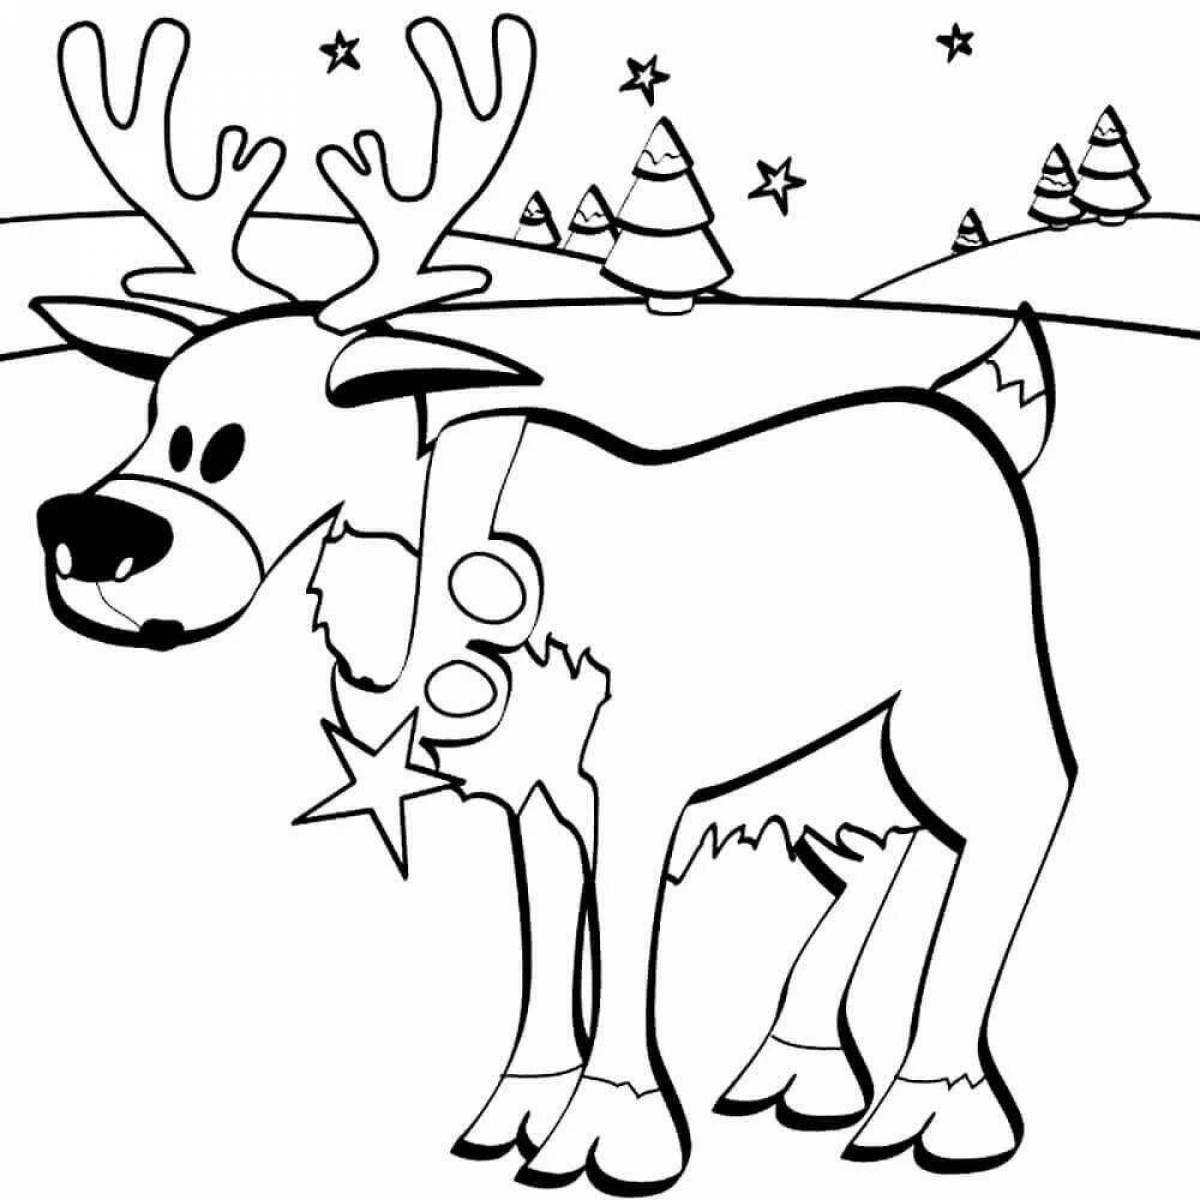 Christmas deer holiday coloring book for kids